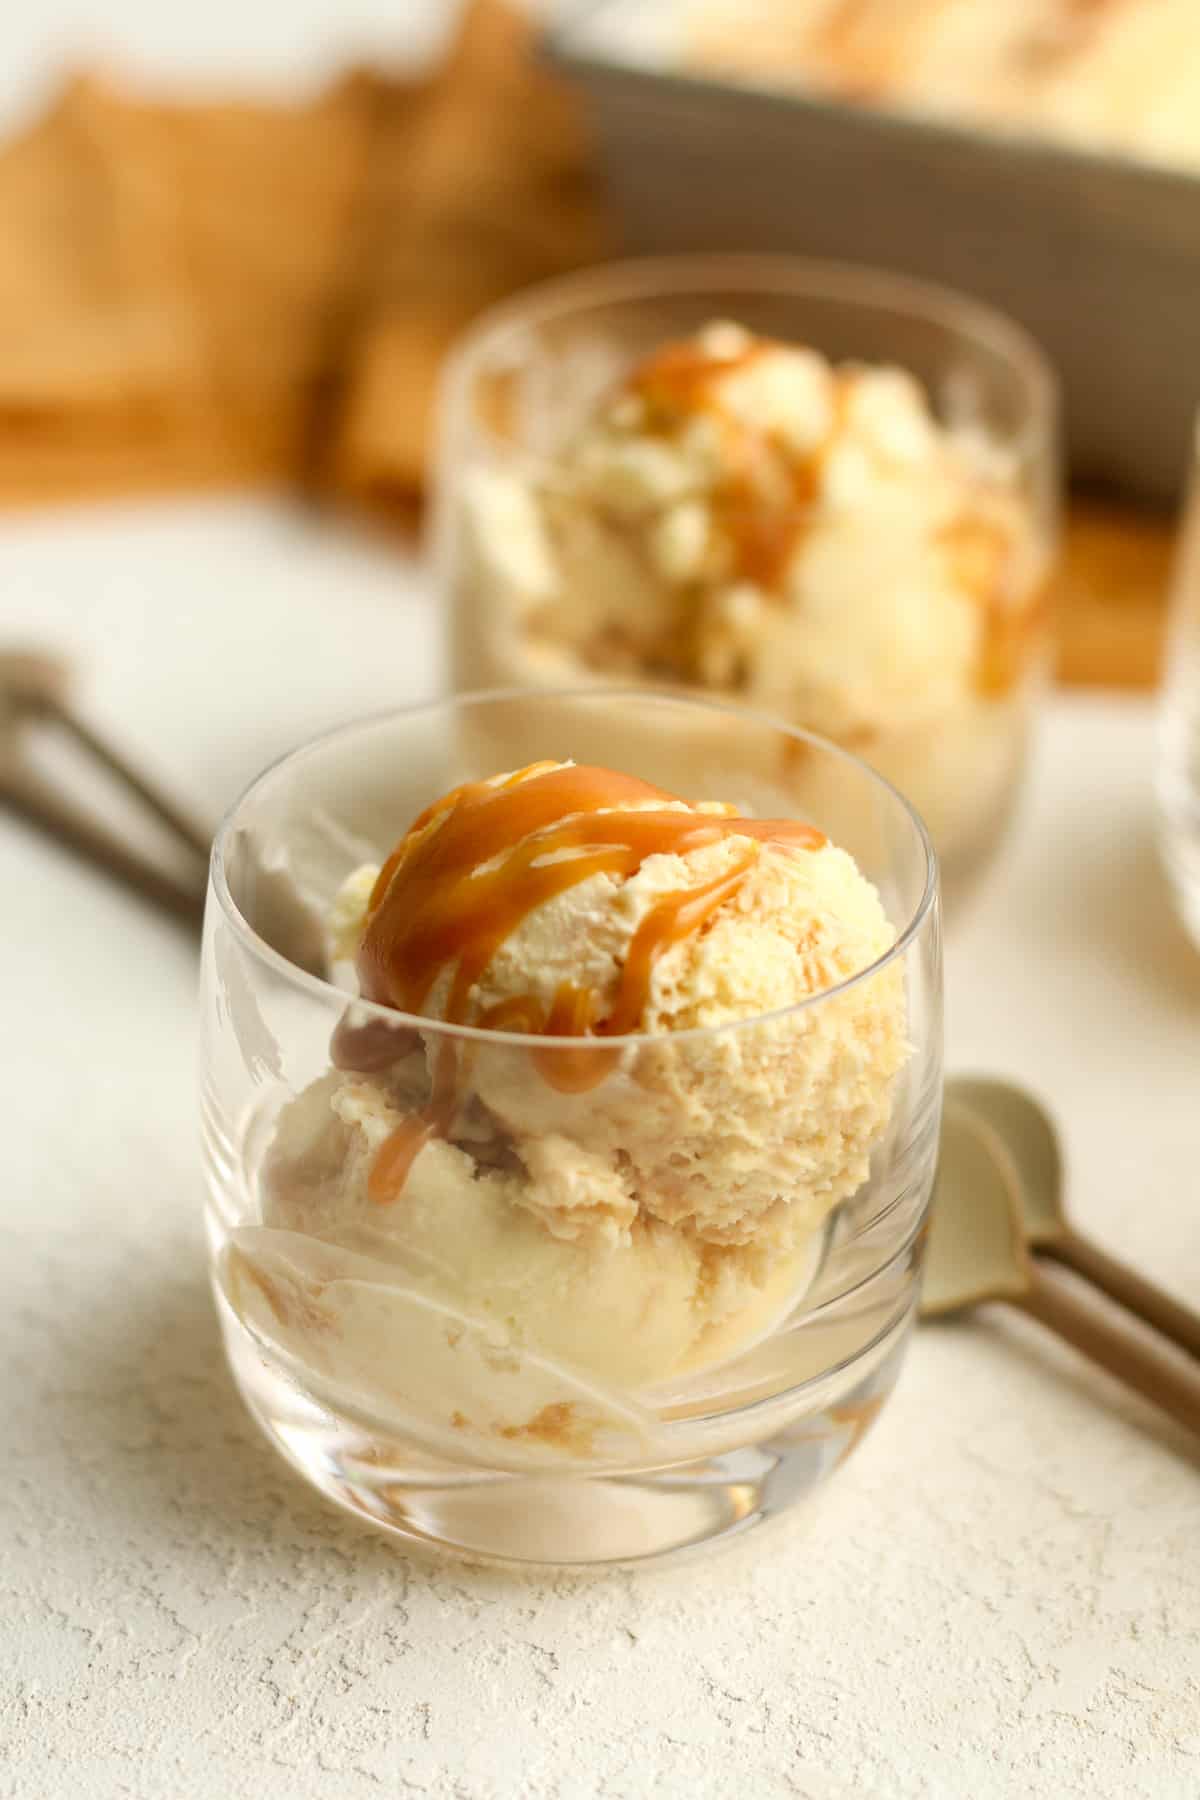 Side view of two glasses of caramel swirl ice cream.